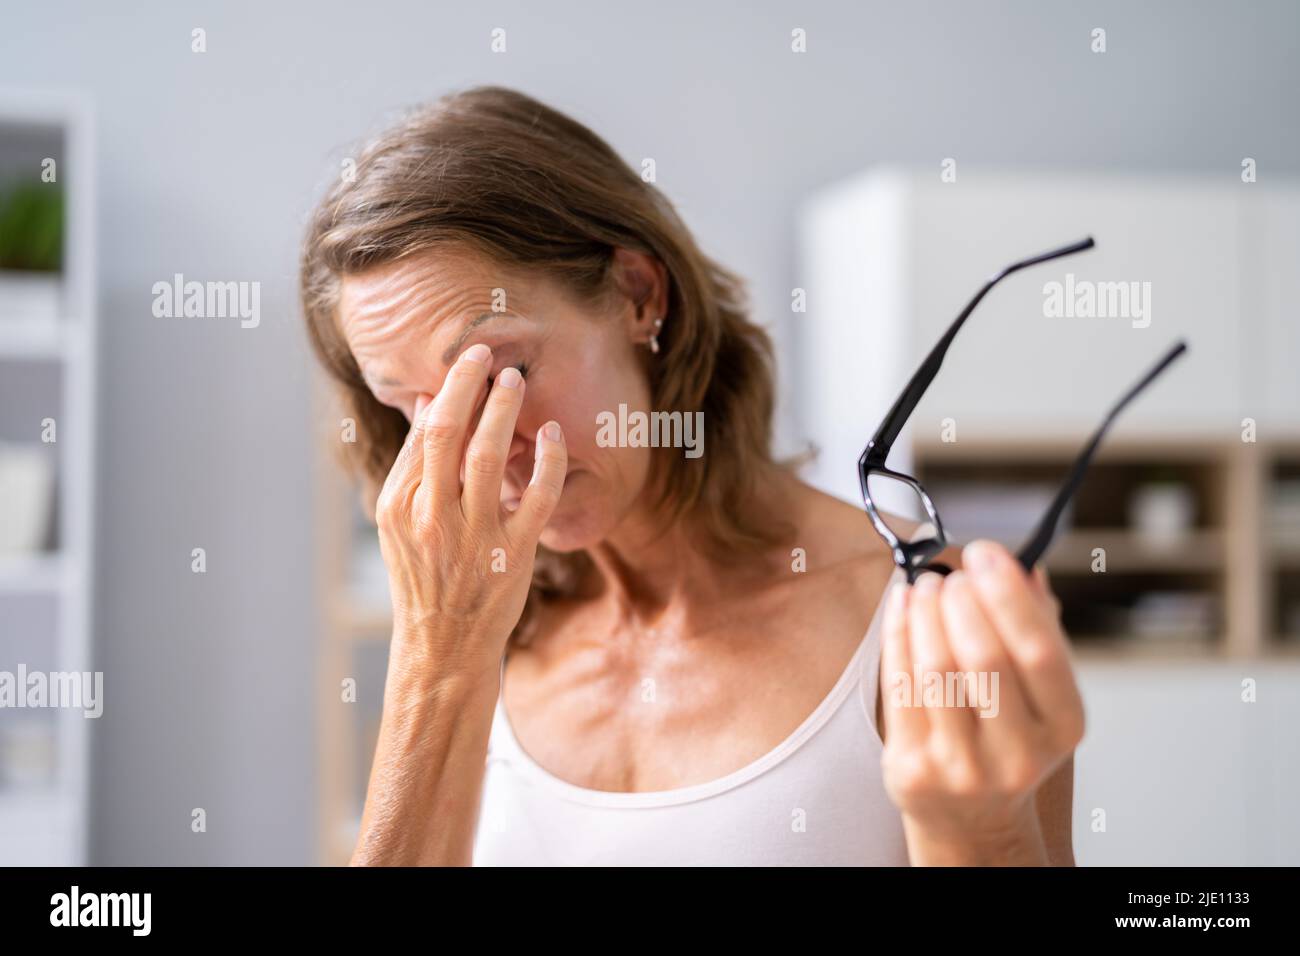 Eye Glaucoma Or Tired Dry Eyesight. Conjunctivitis And Itching Stock Photo